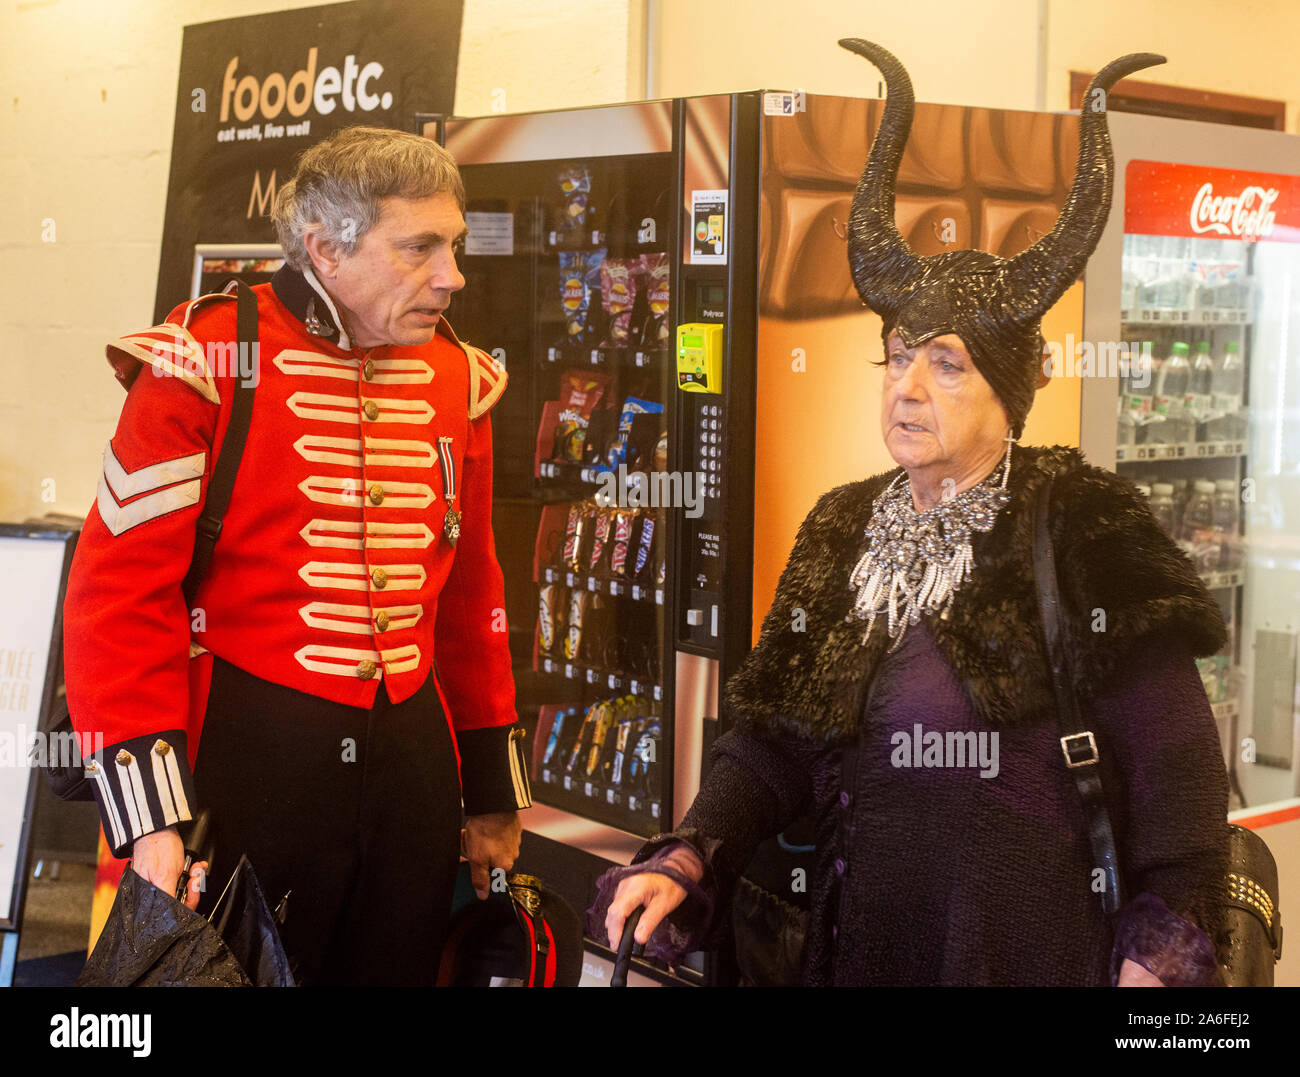 Senior couple in traditional Goth costumes by vending machines, Whitby Goth Weekend Festival, Whitby, North Yorkshire, UK, 26 October 2019 Stock Photo